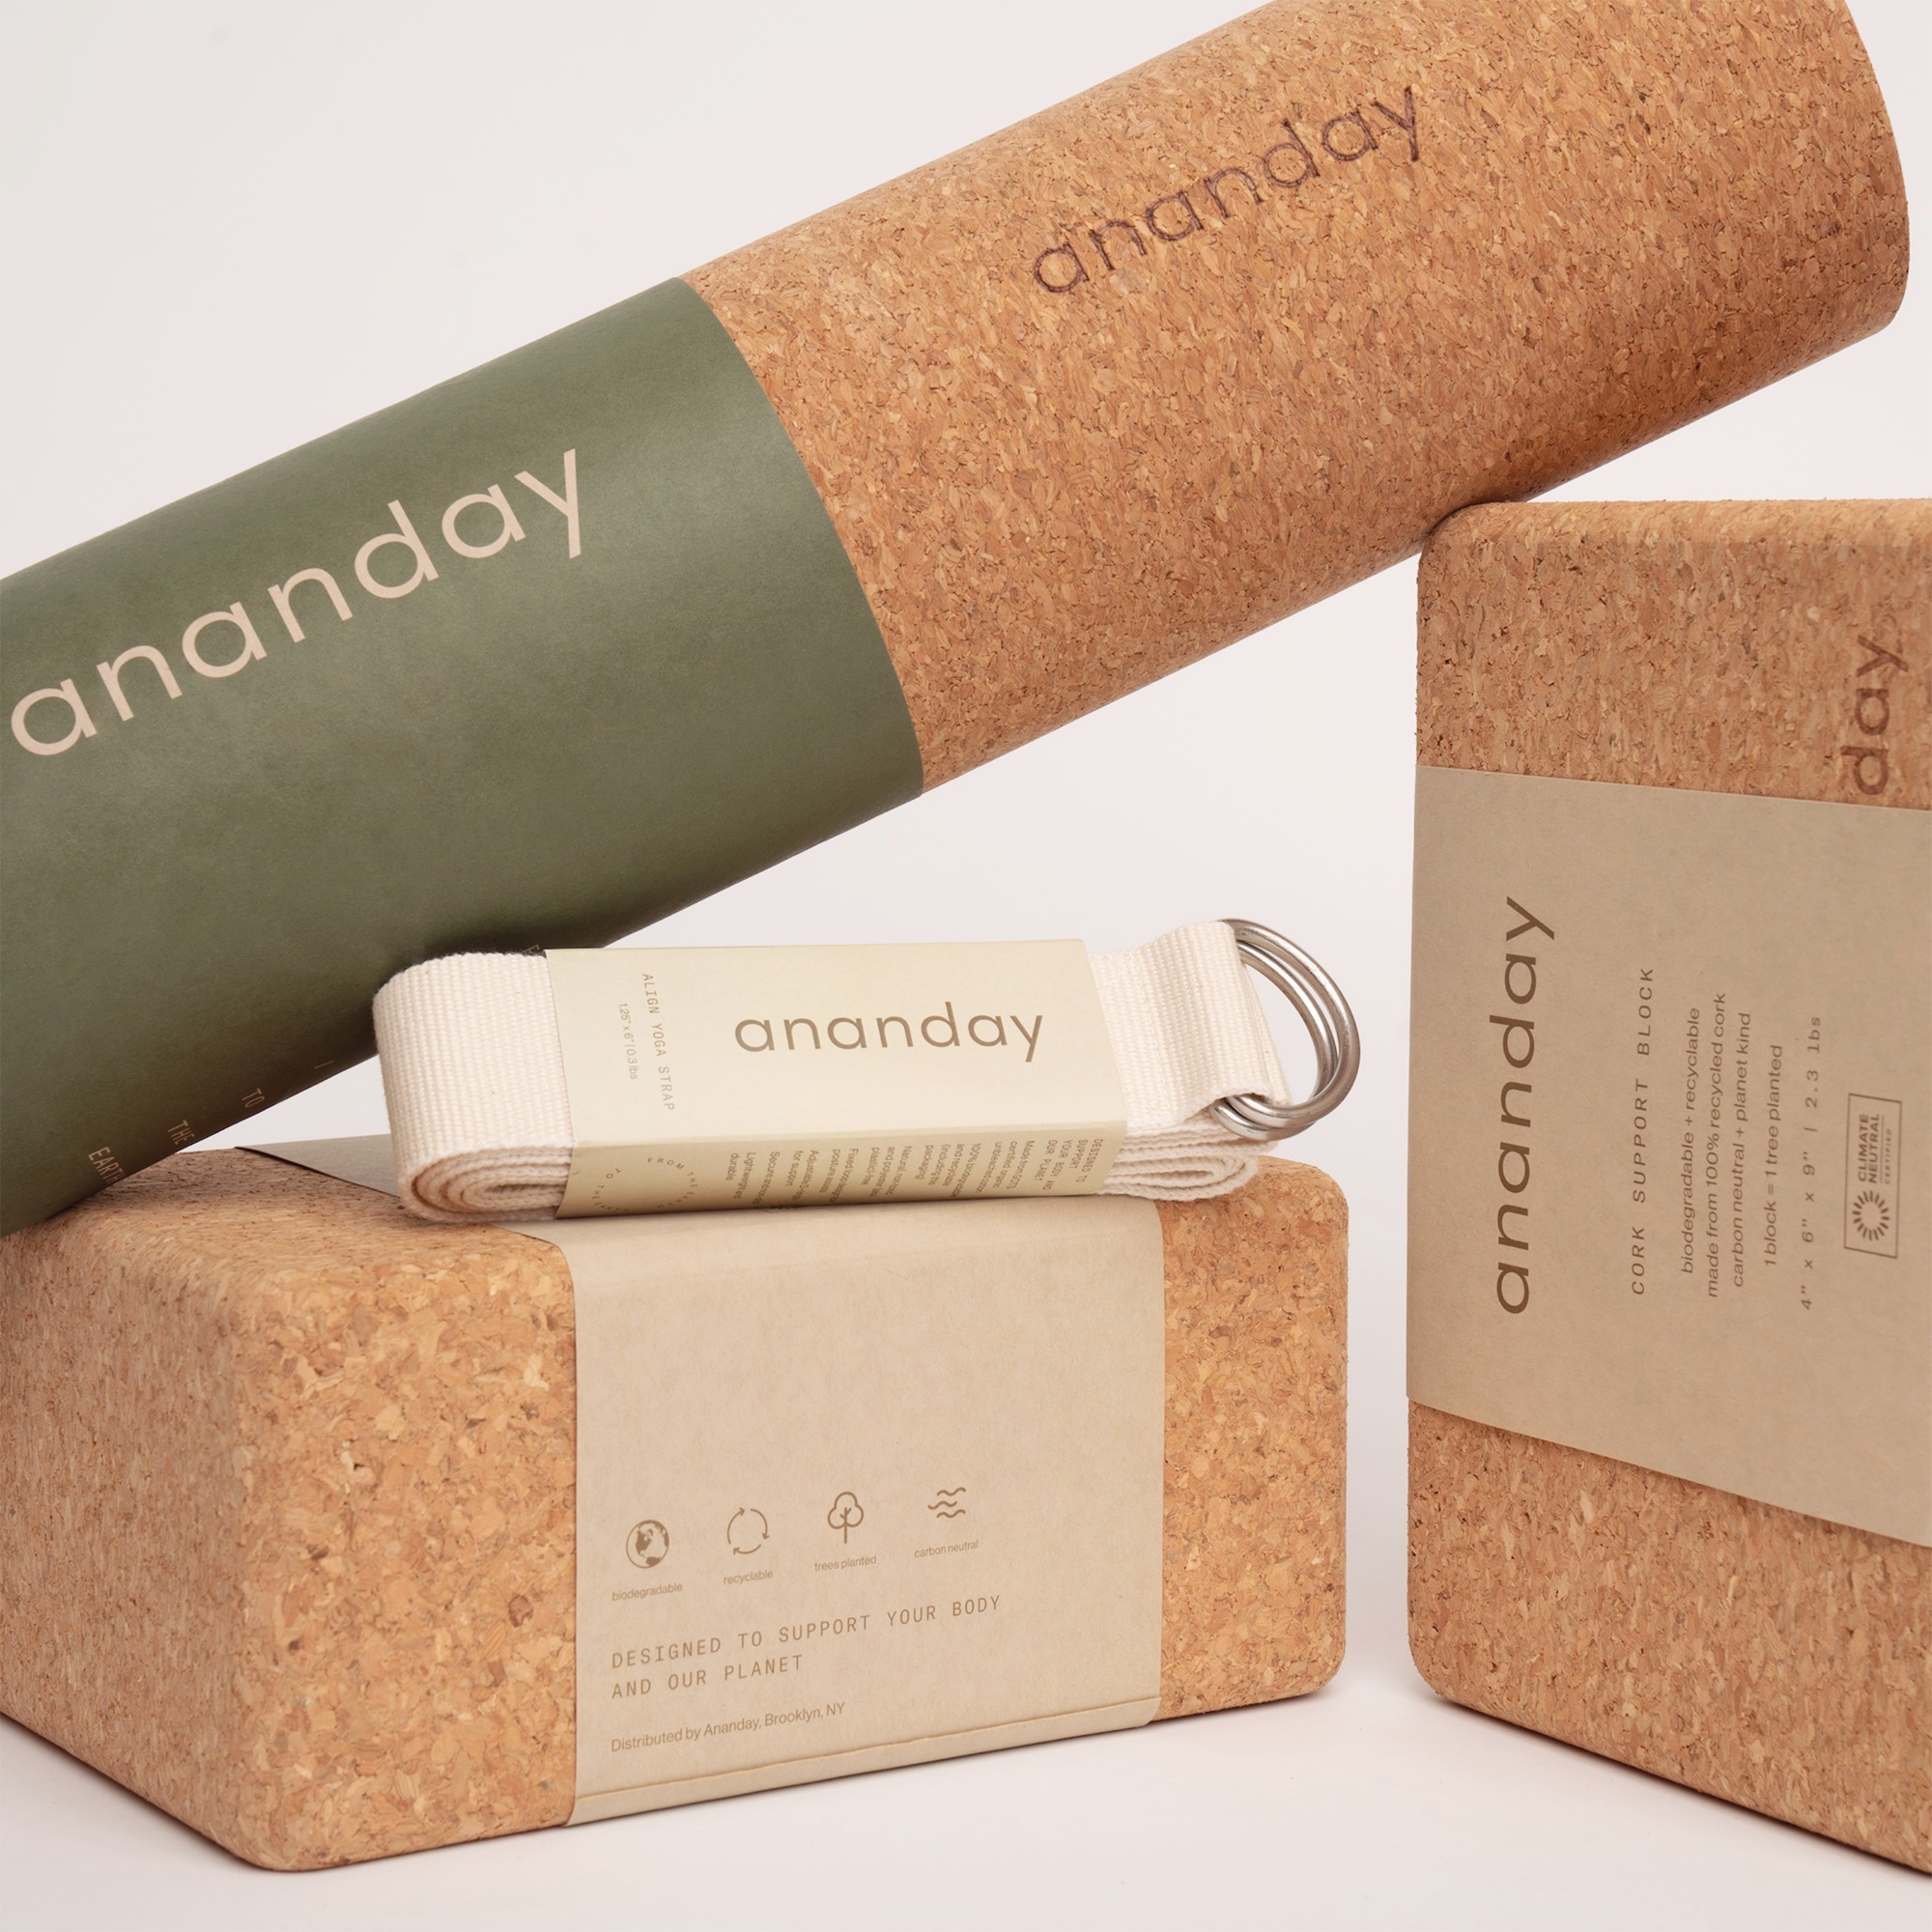 Cork Yoga Block by Ananday - Reprise Activewear